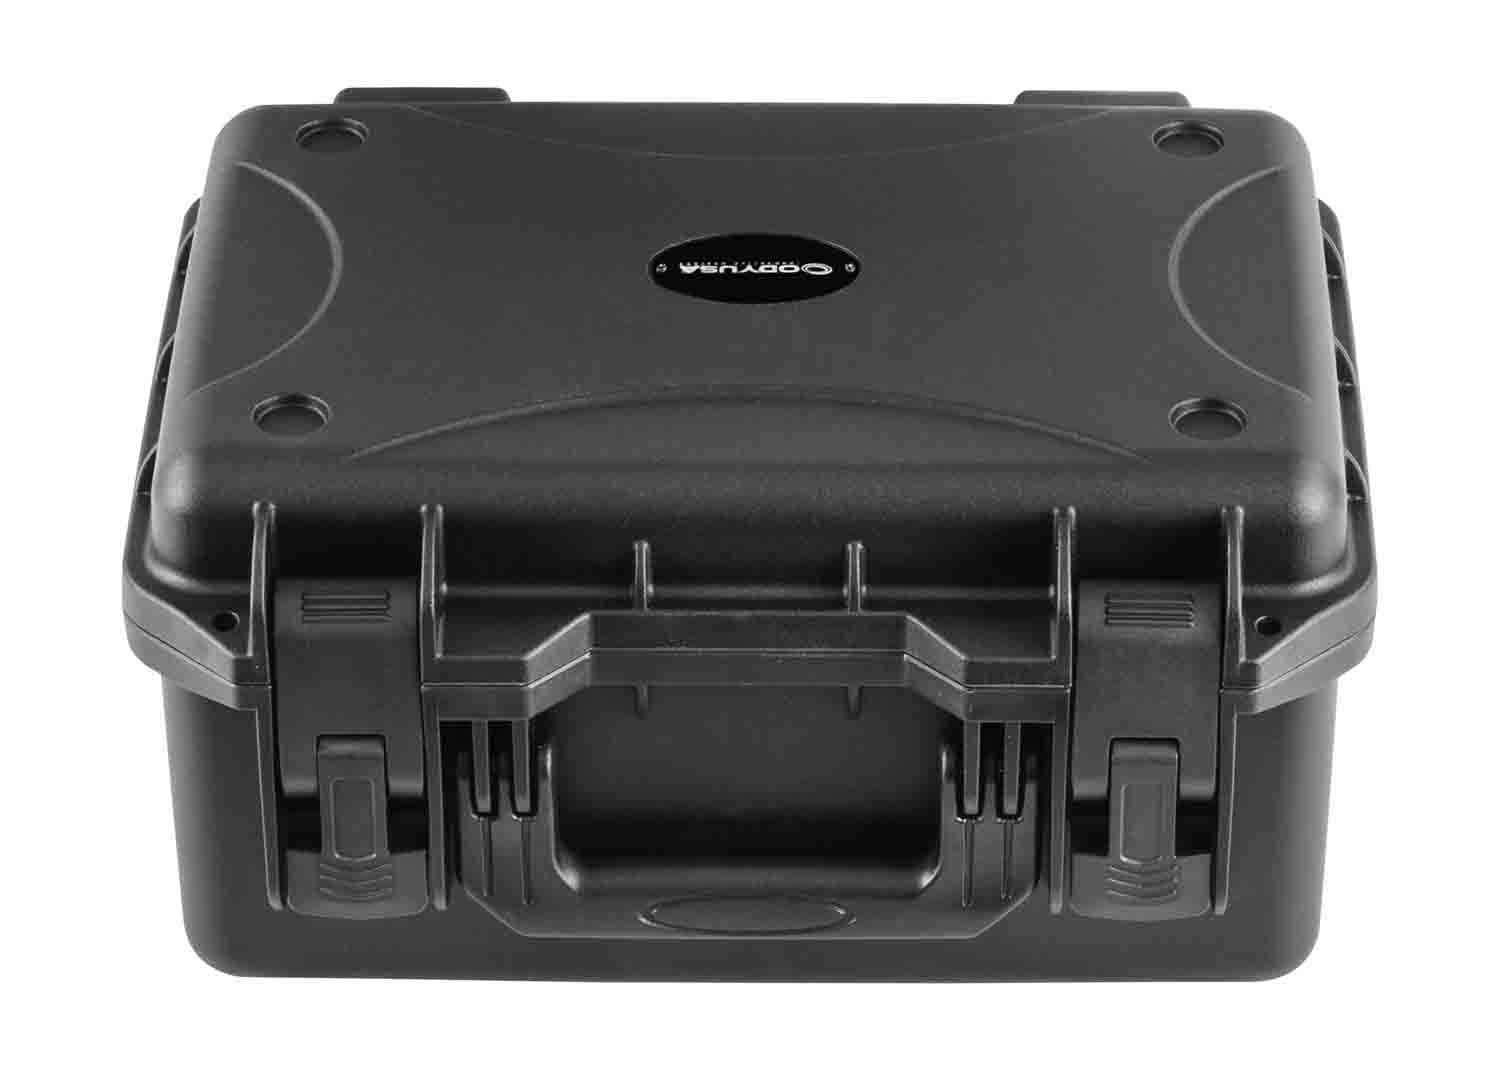 Odyssey VU120806NF Vulcan Injection-Molded Utility Case - 13 x 8.25 x 5" Interior - Hollywood DJ